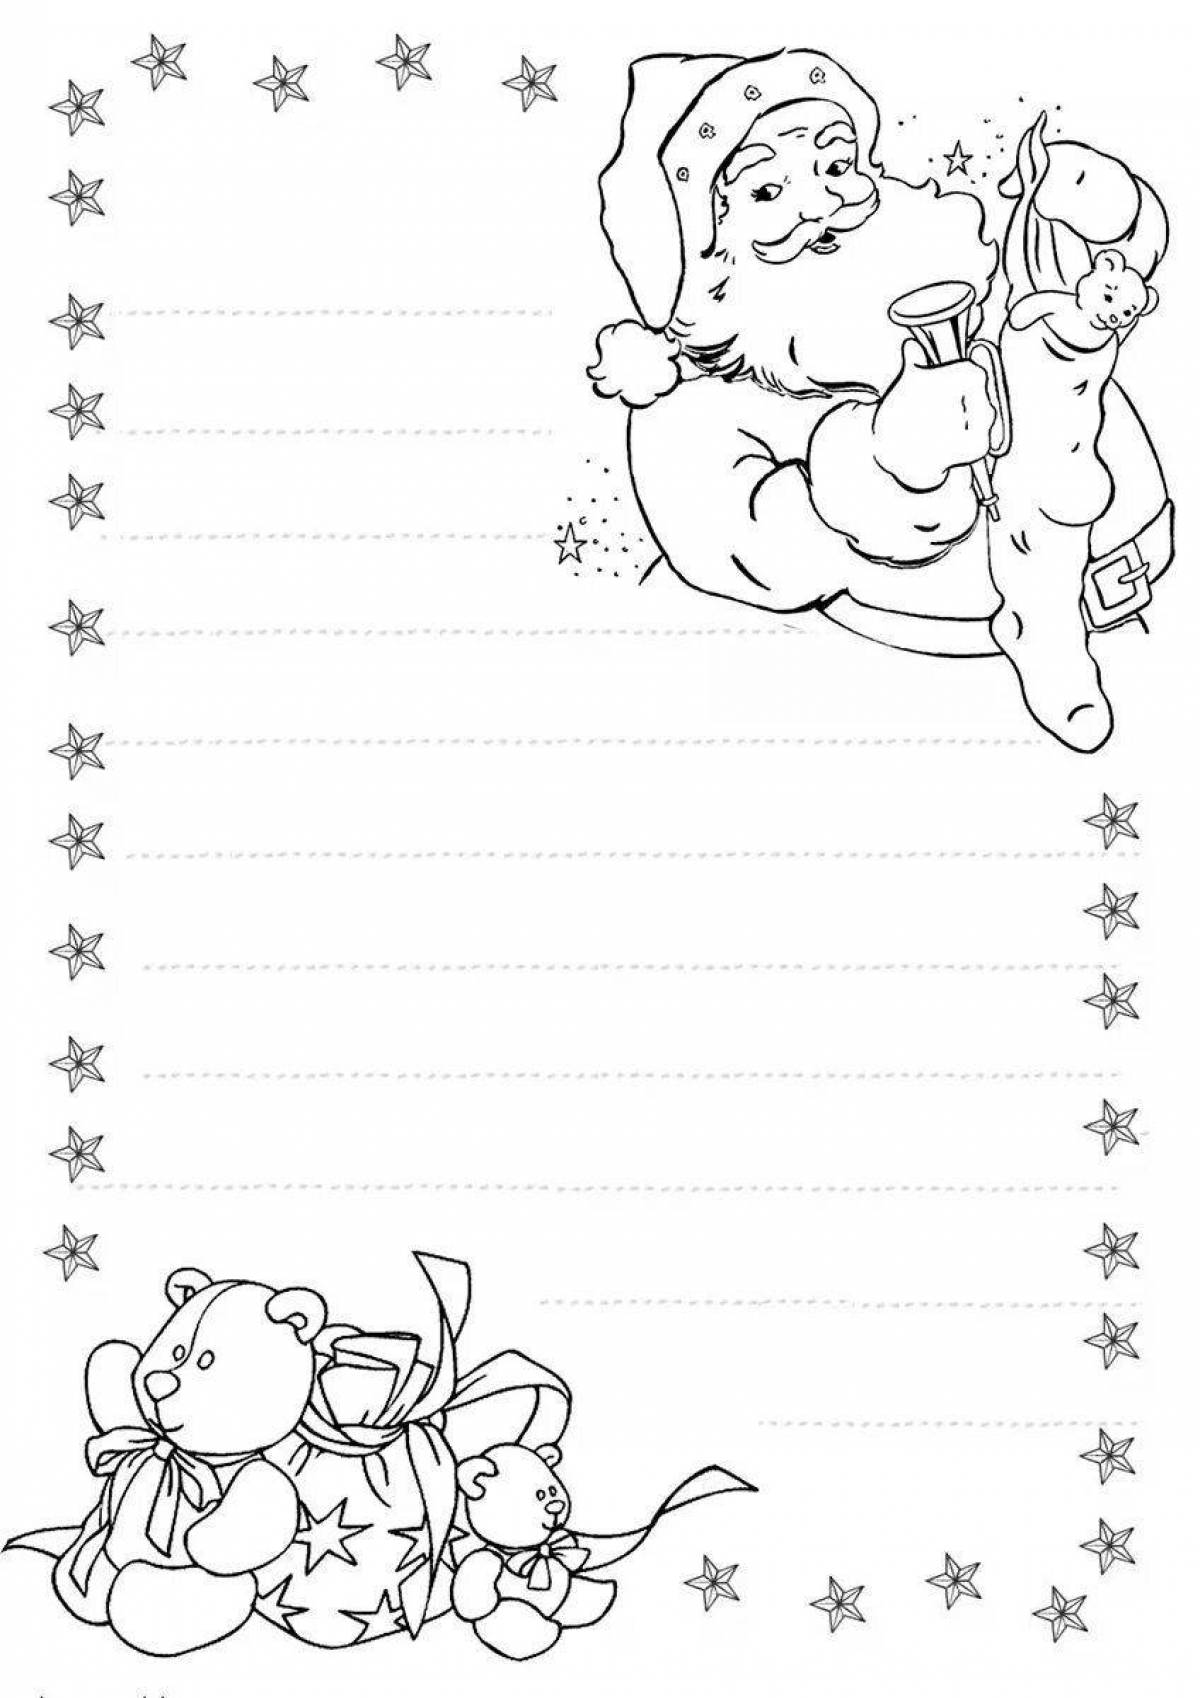 Charming letter coloring book